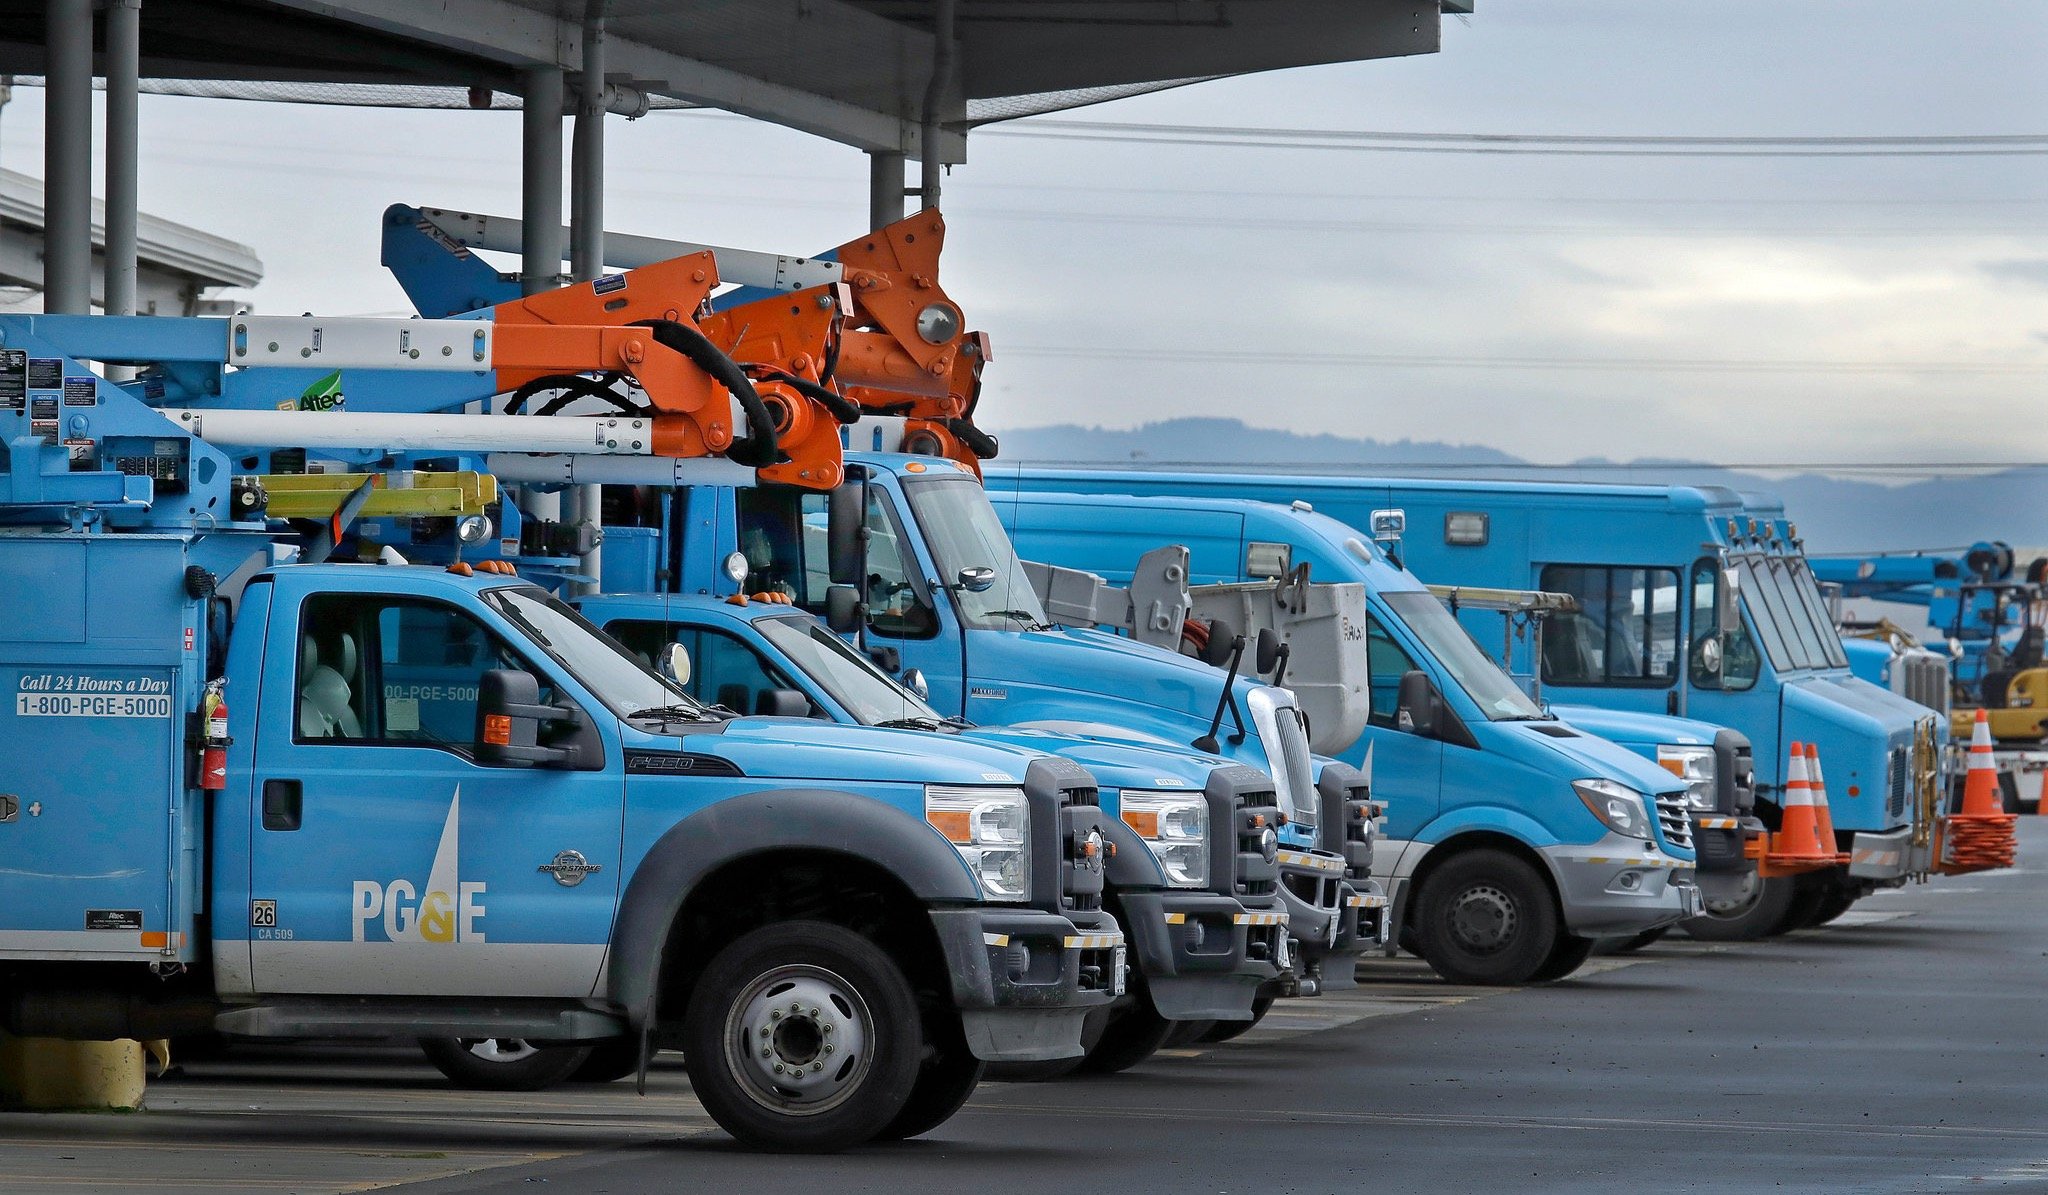 PG&E customer engagement Countable case study